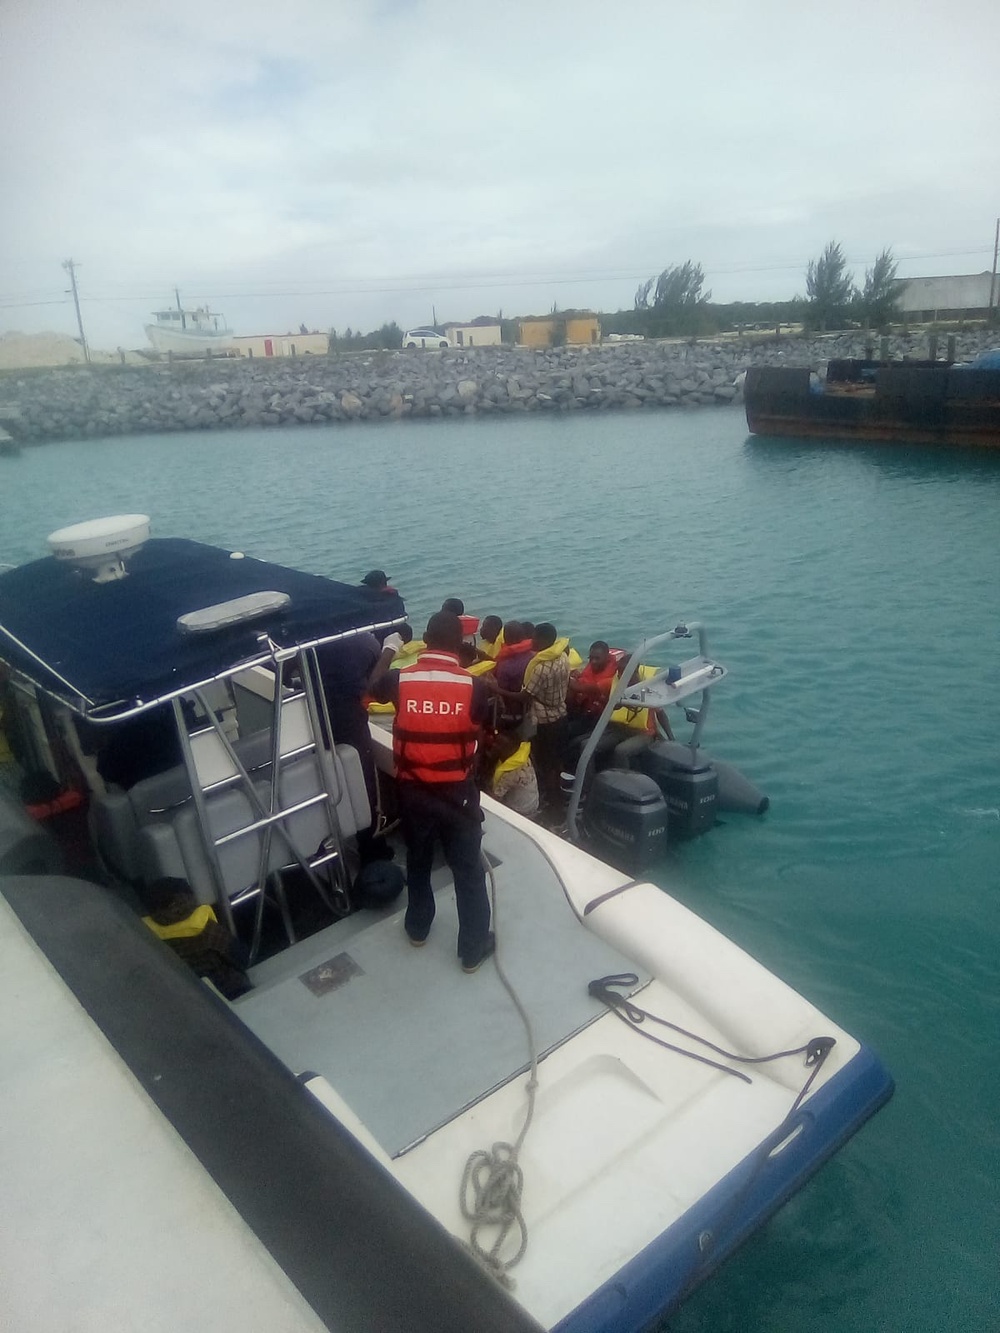 Coast Guard, partner agencies rescue 187 people 17 miles southwest of Turks and Caicos Islands